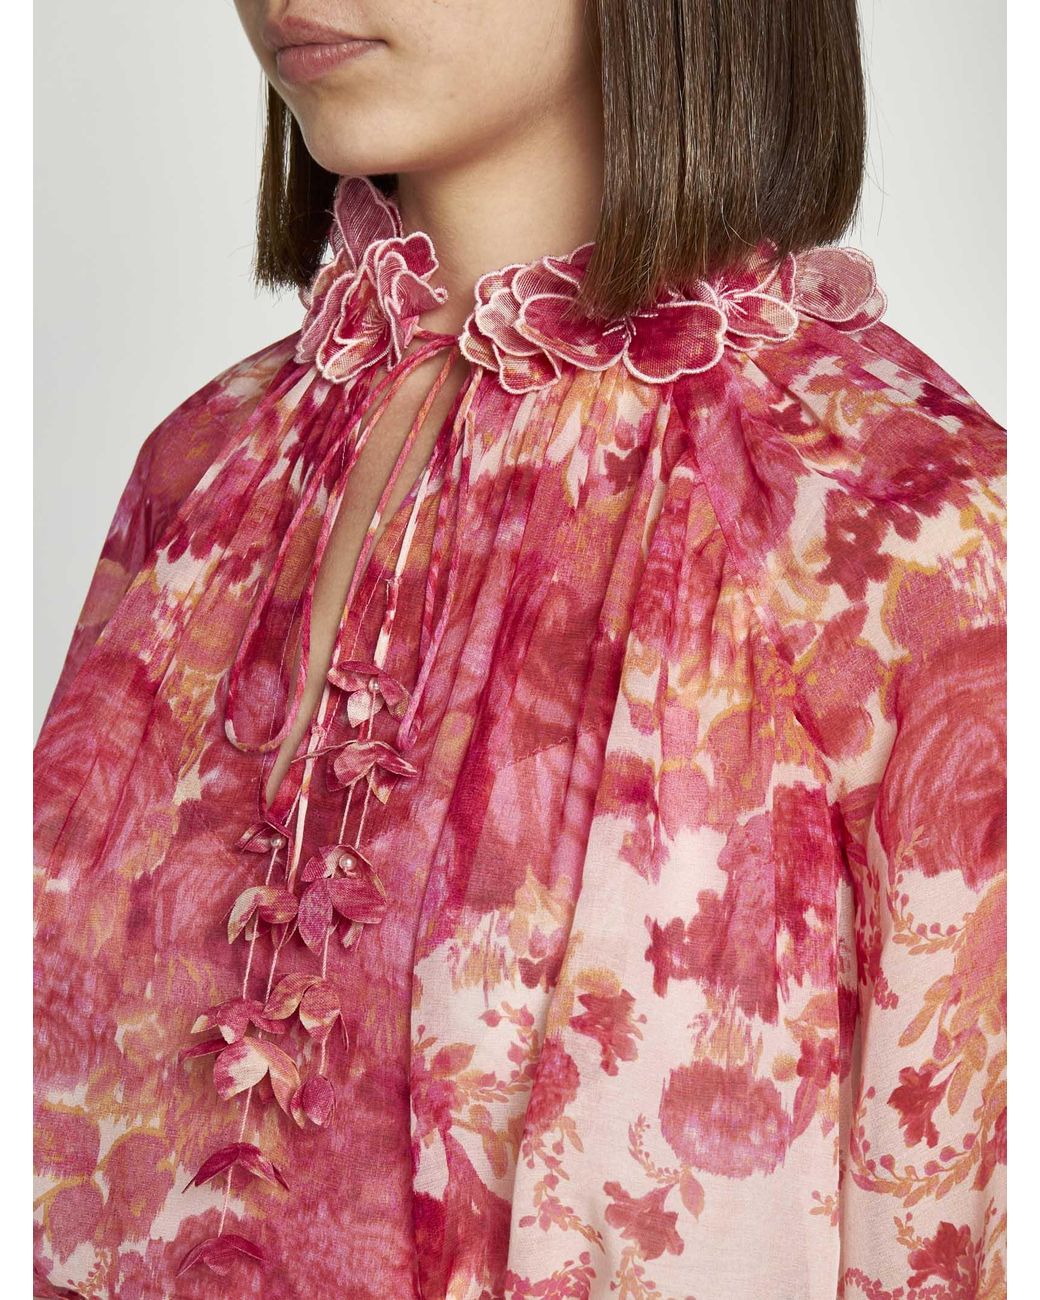 Zimmermann High Tide Billow Print Cotton And Silk Blouse in Pink